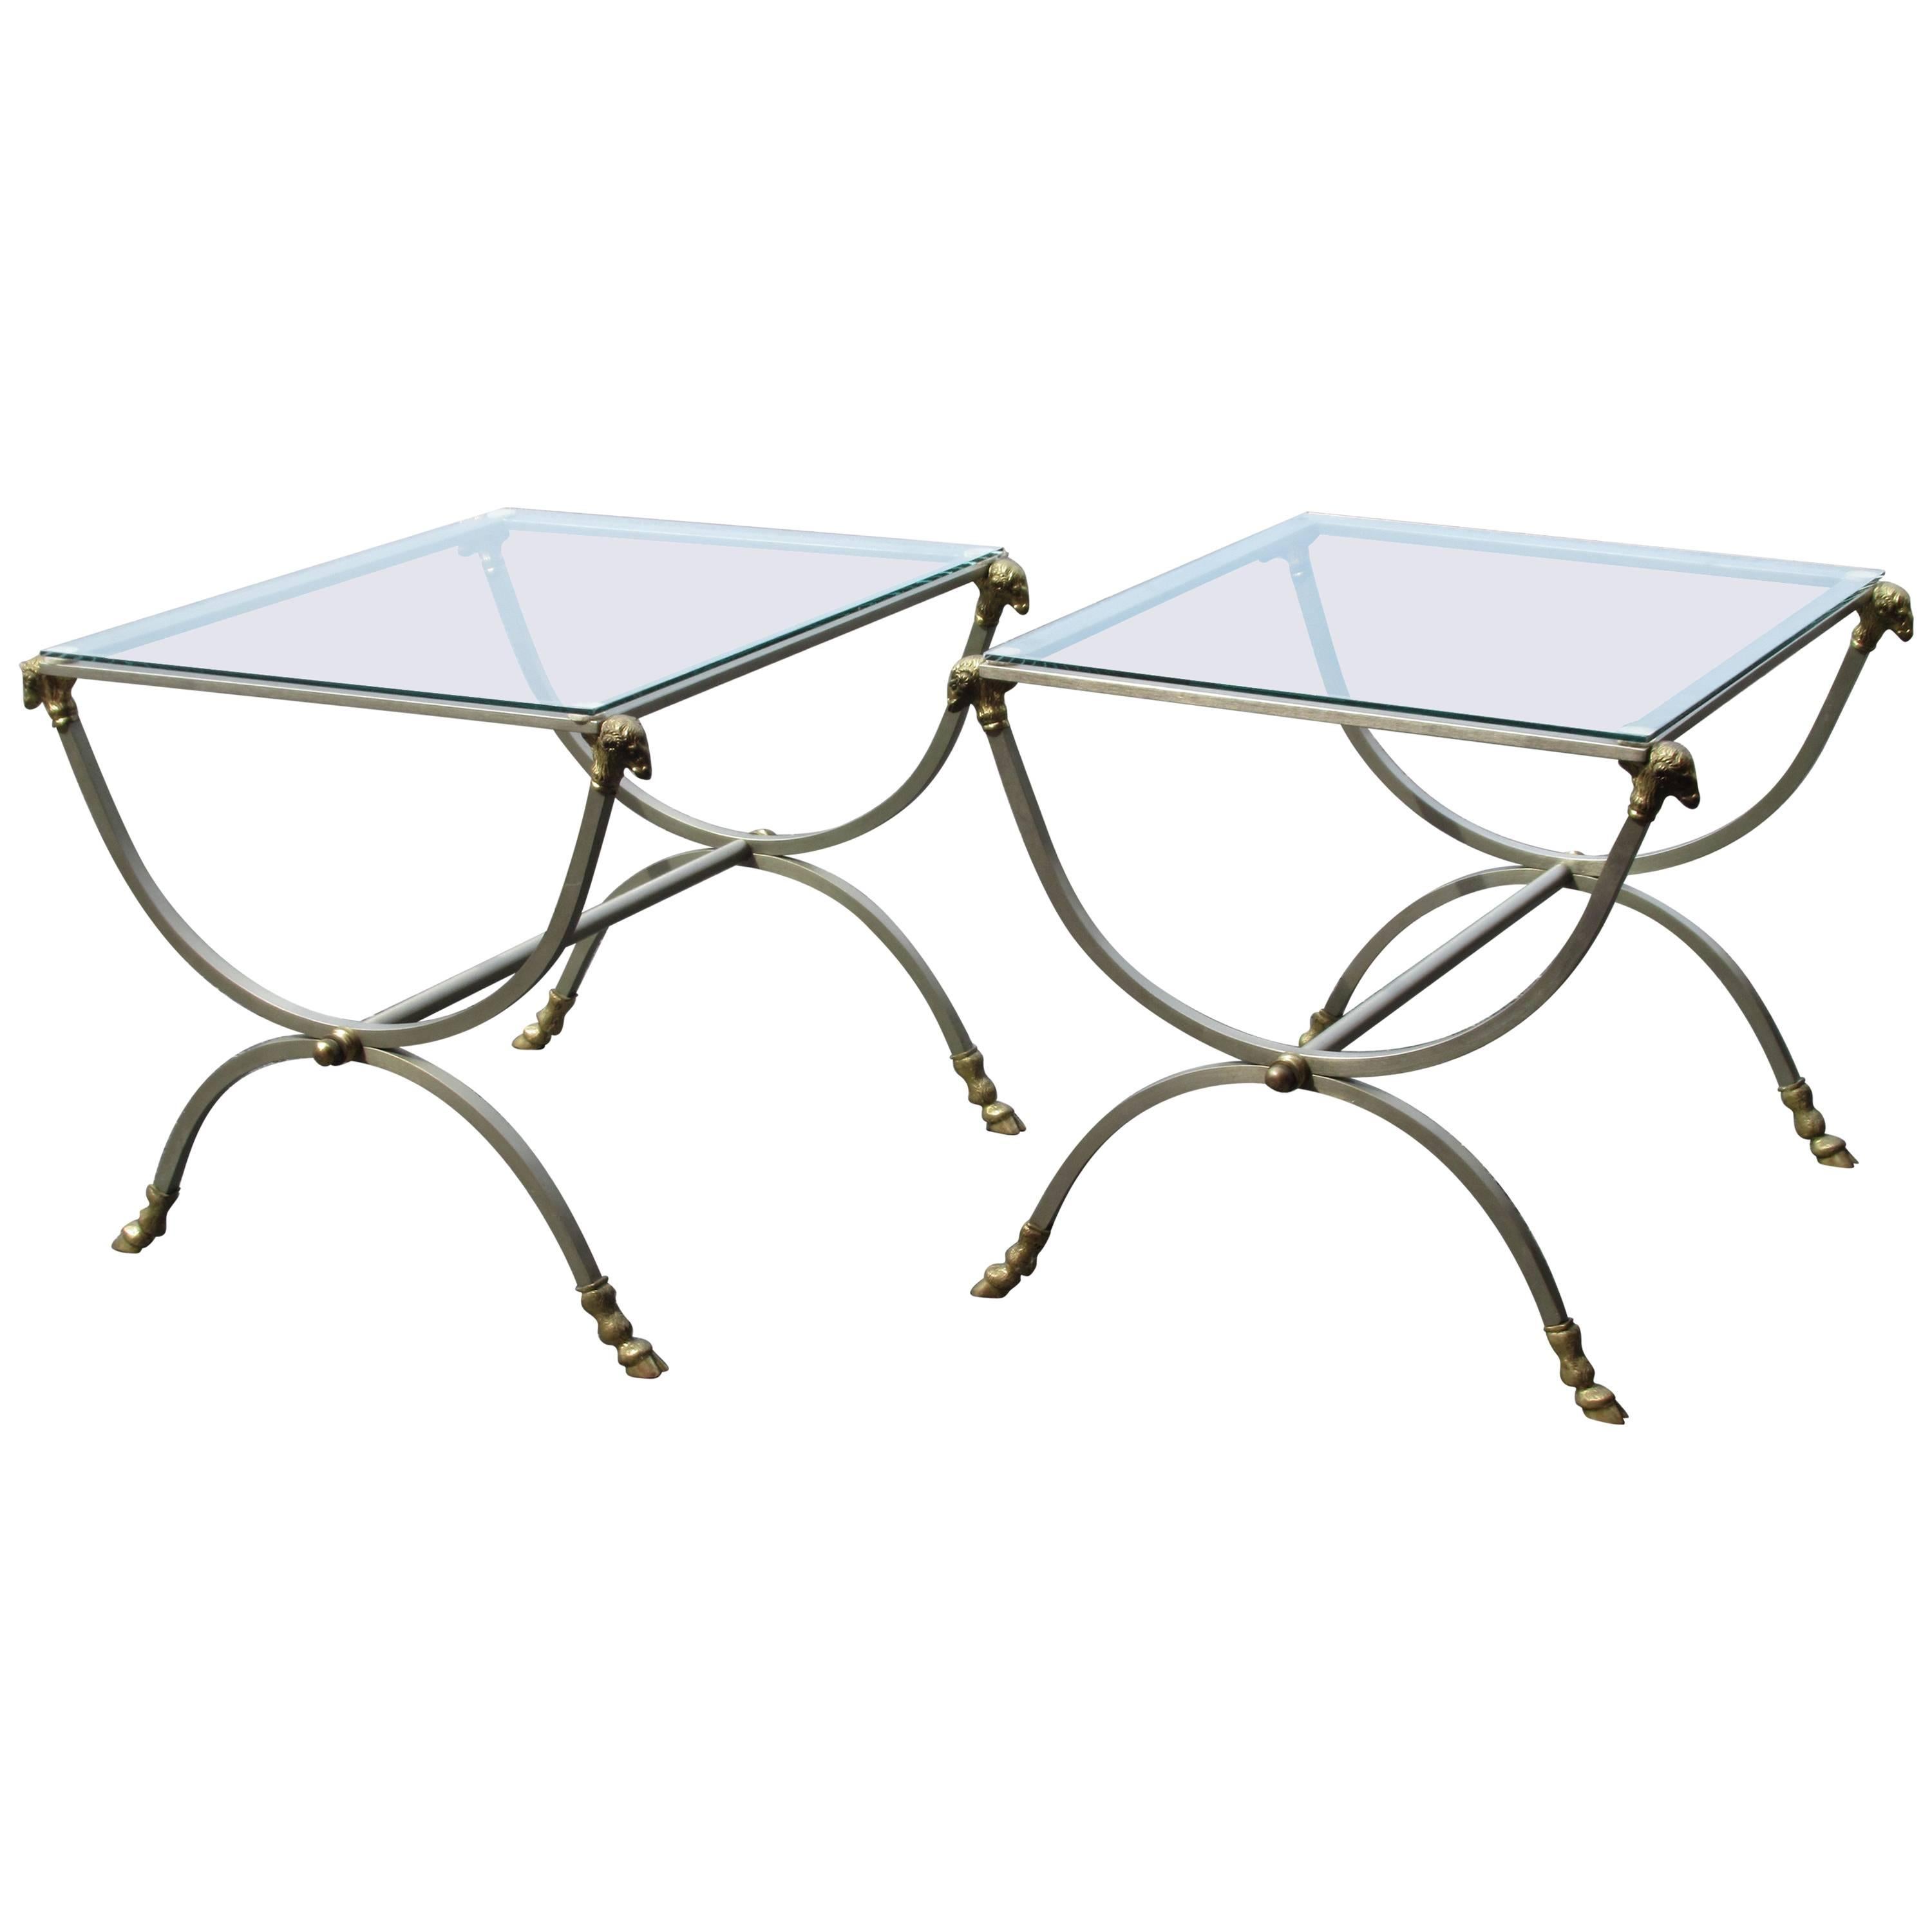  Neoclassical Steel and Bronze Tables 